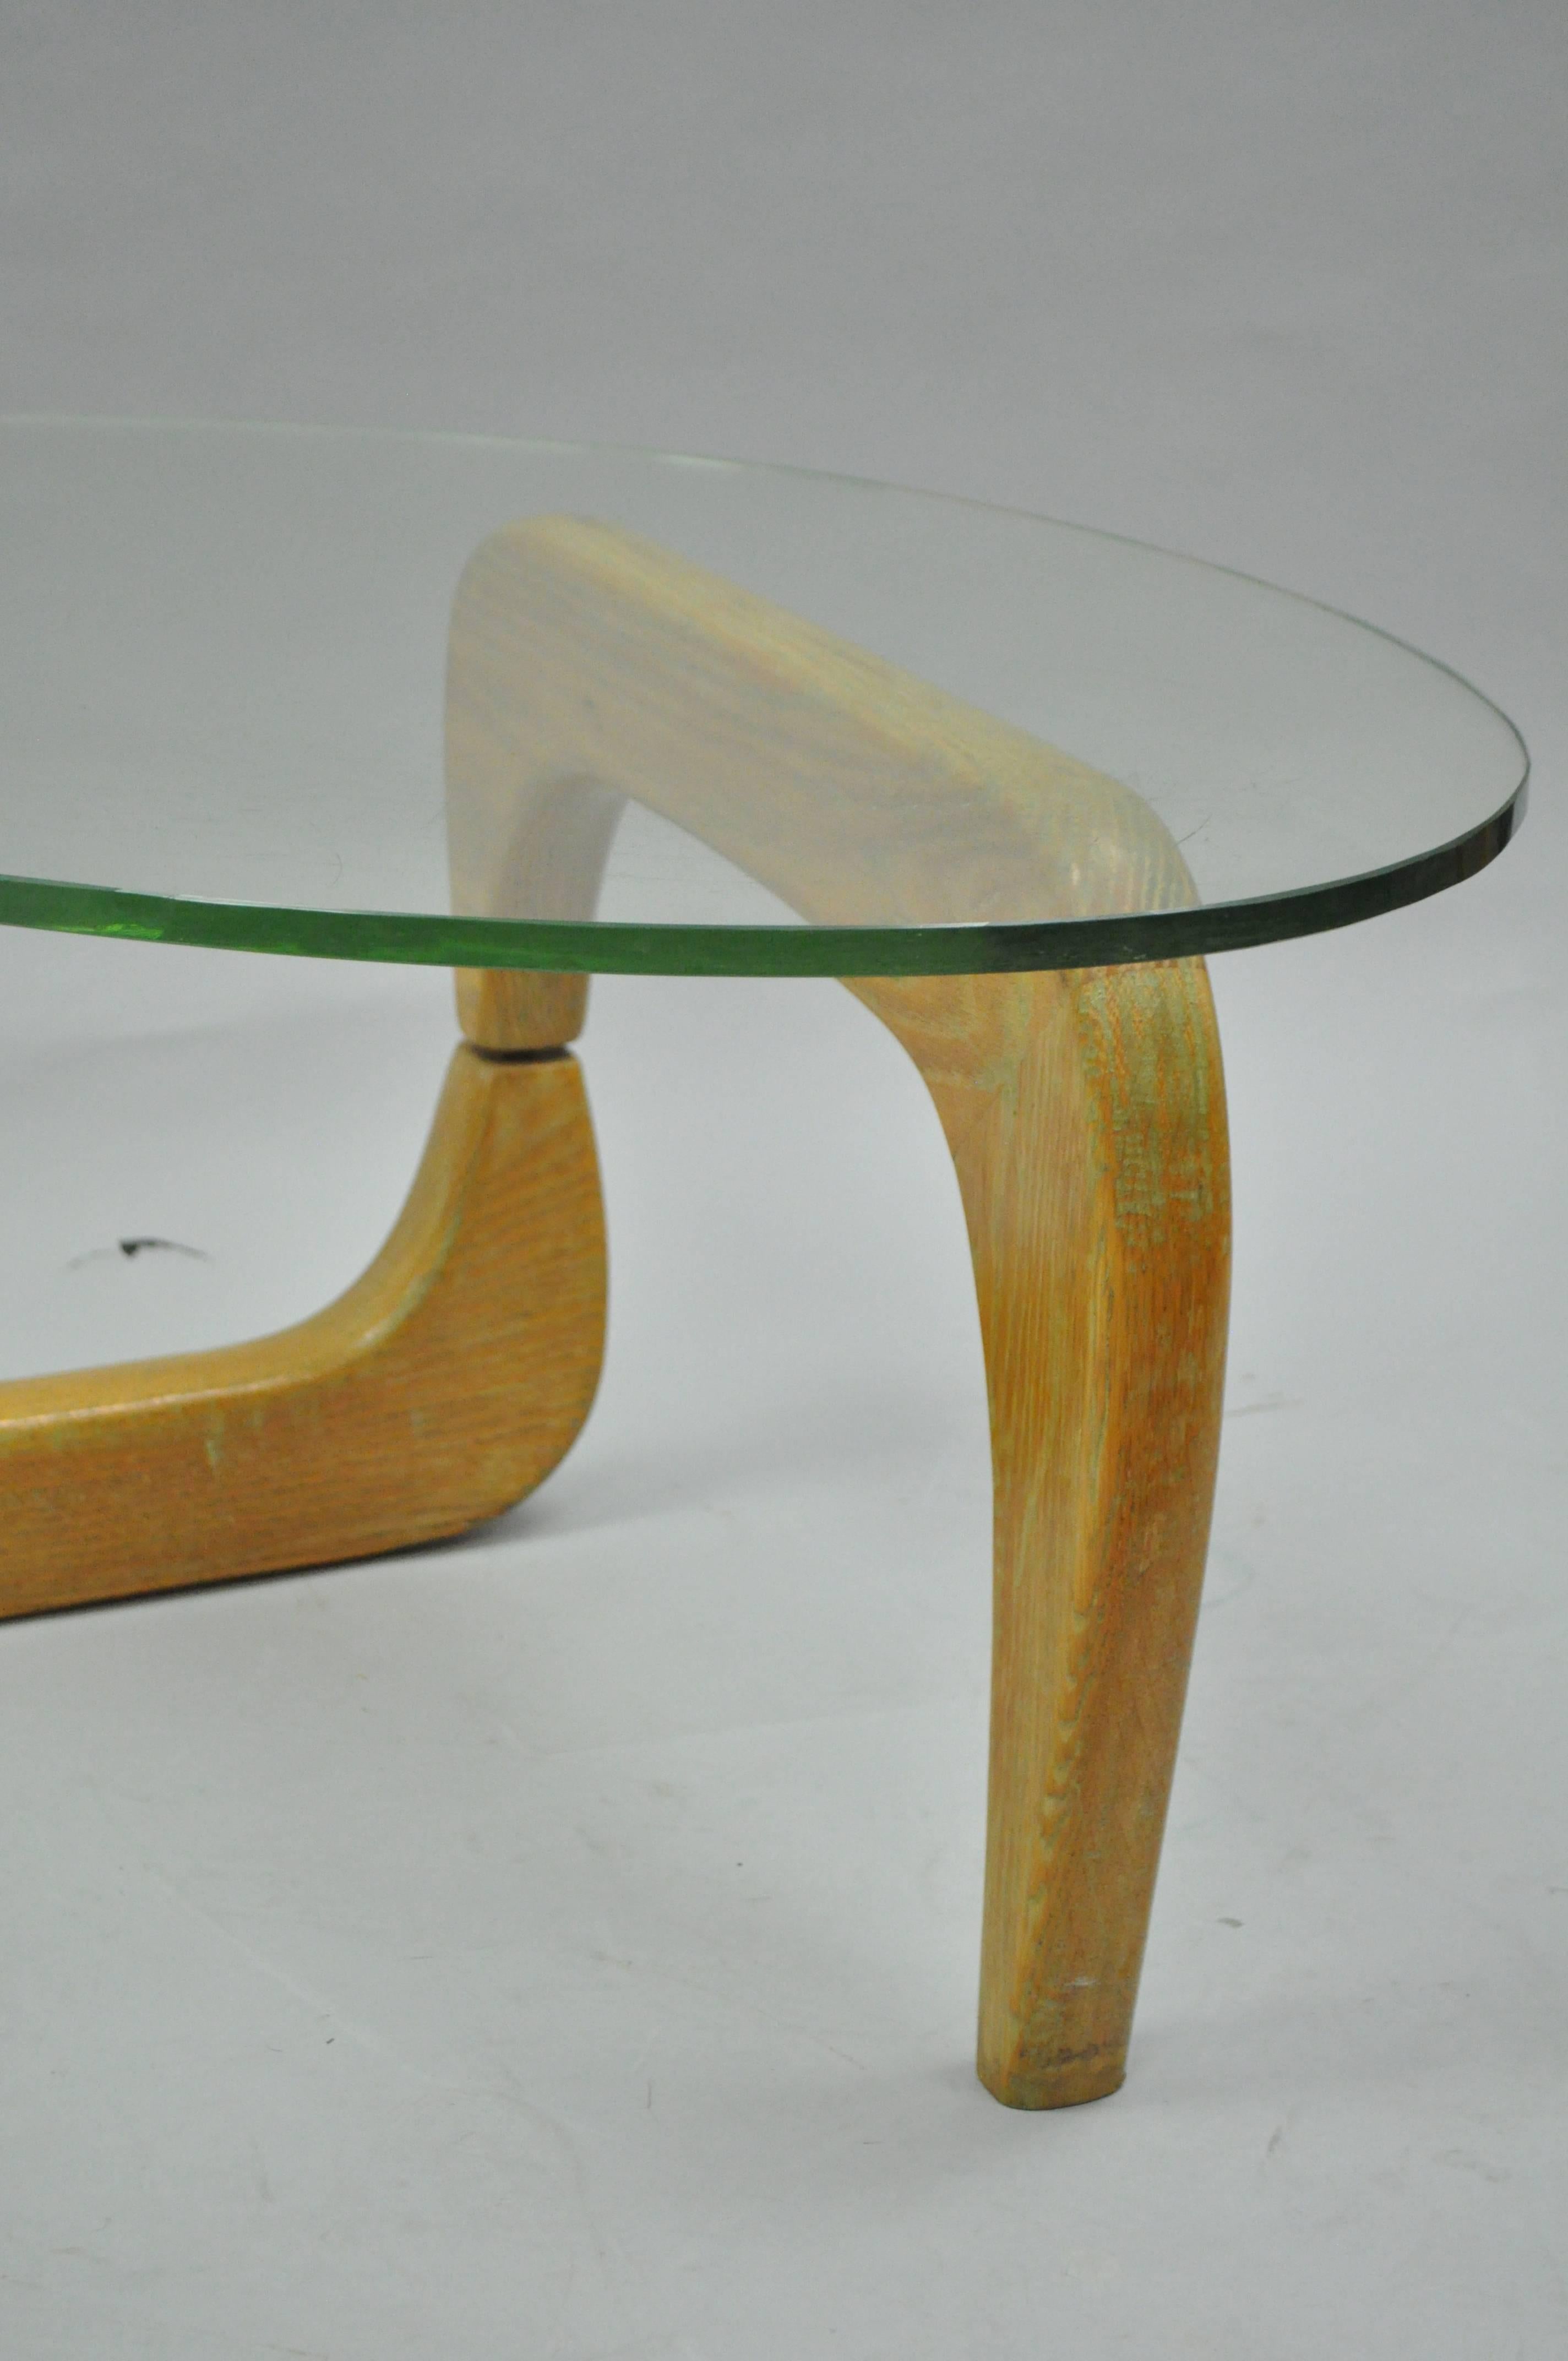 1950s kidney shaped coffee table